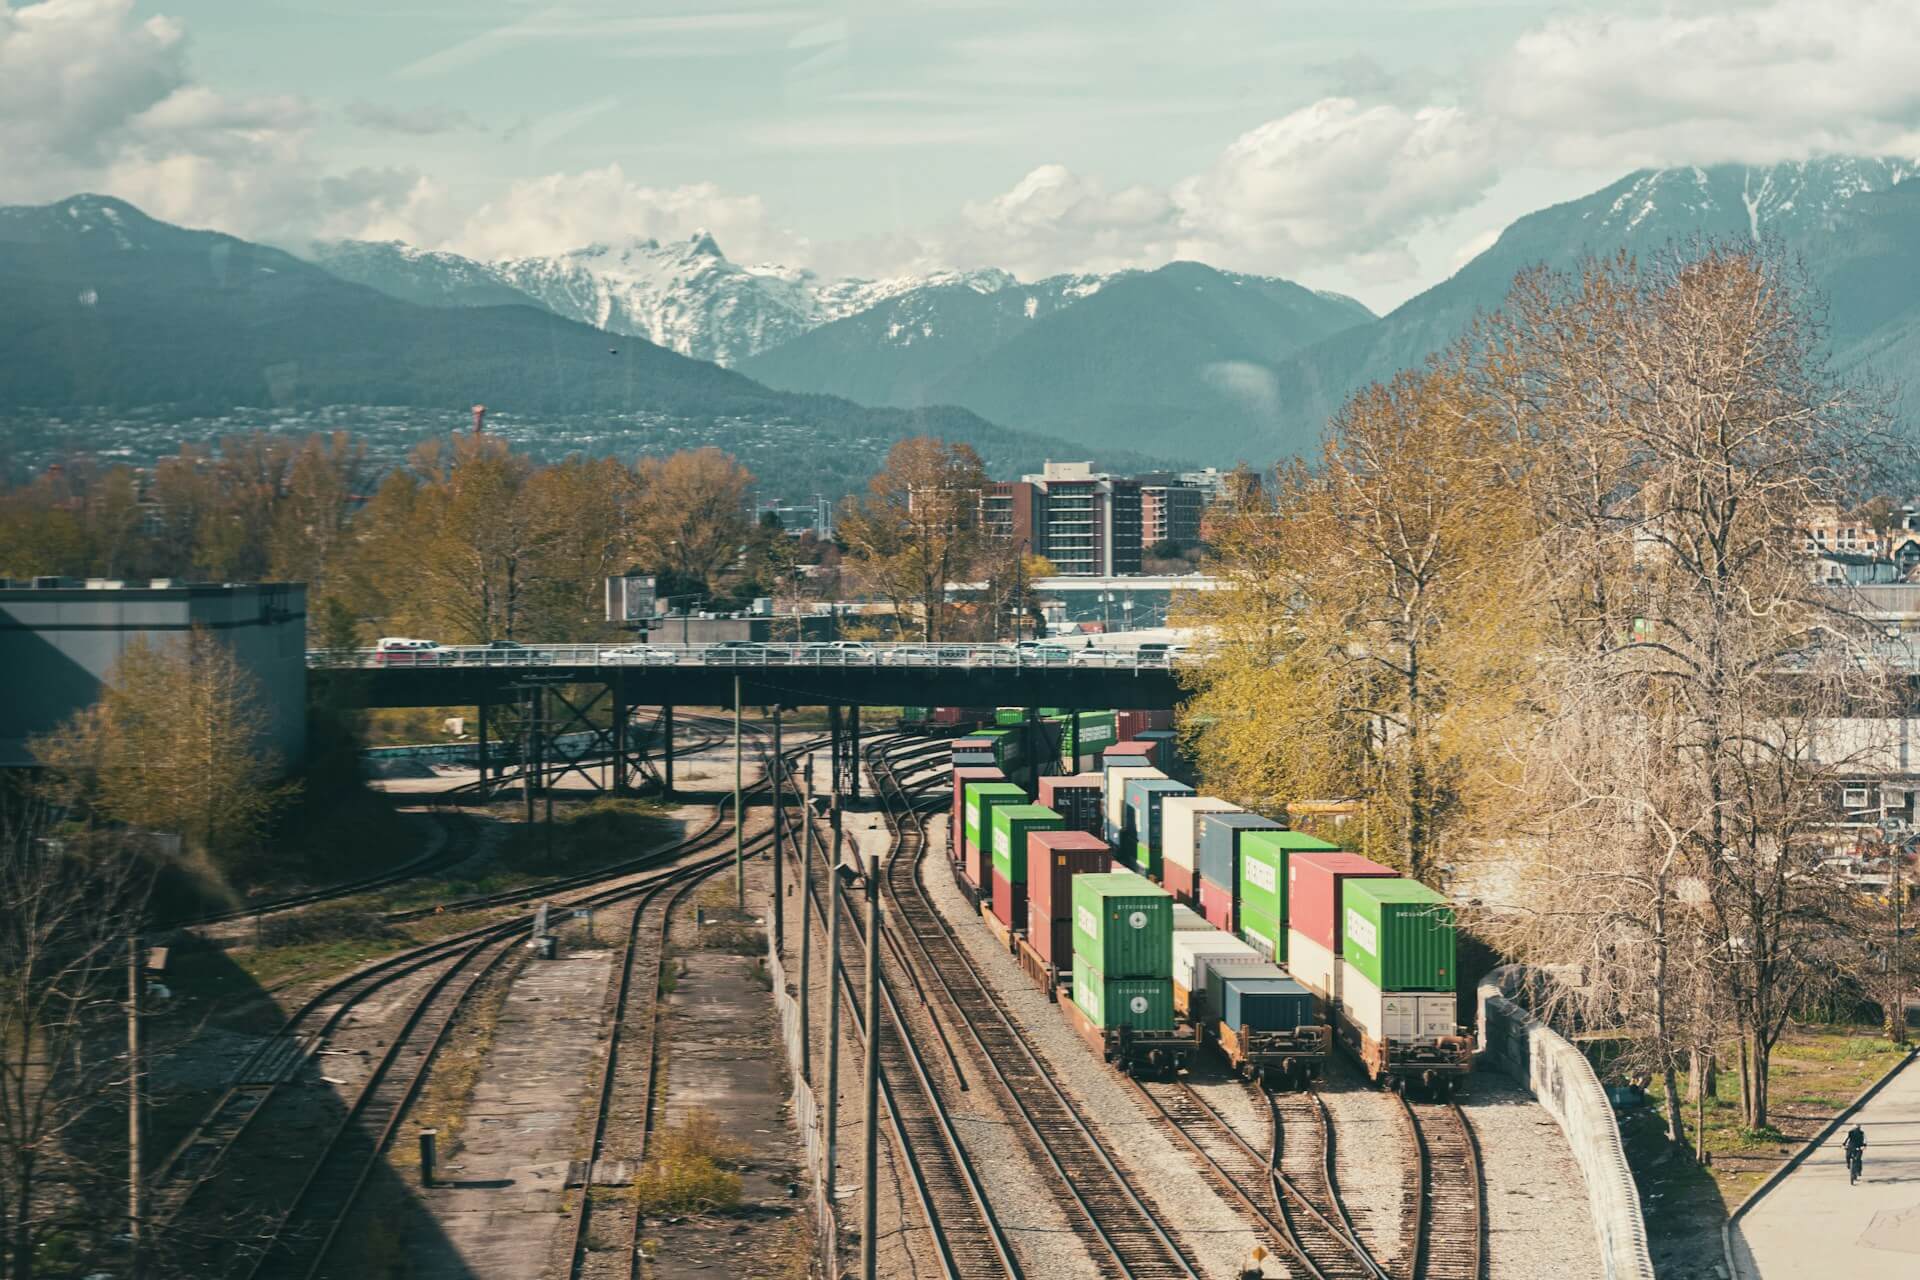 Air and Rail Demand Surges, Ocean Carrier Surcharges, and More Supply Chain News